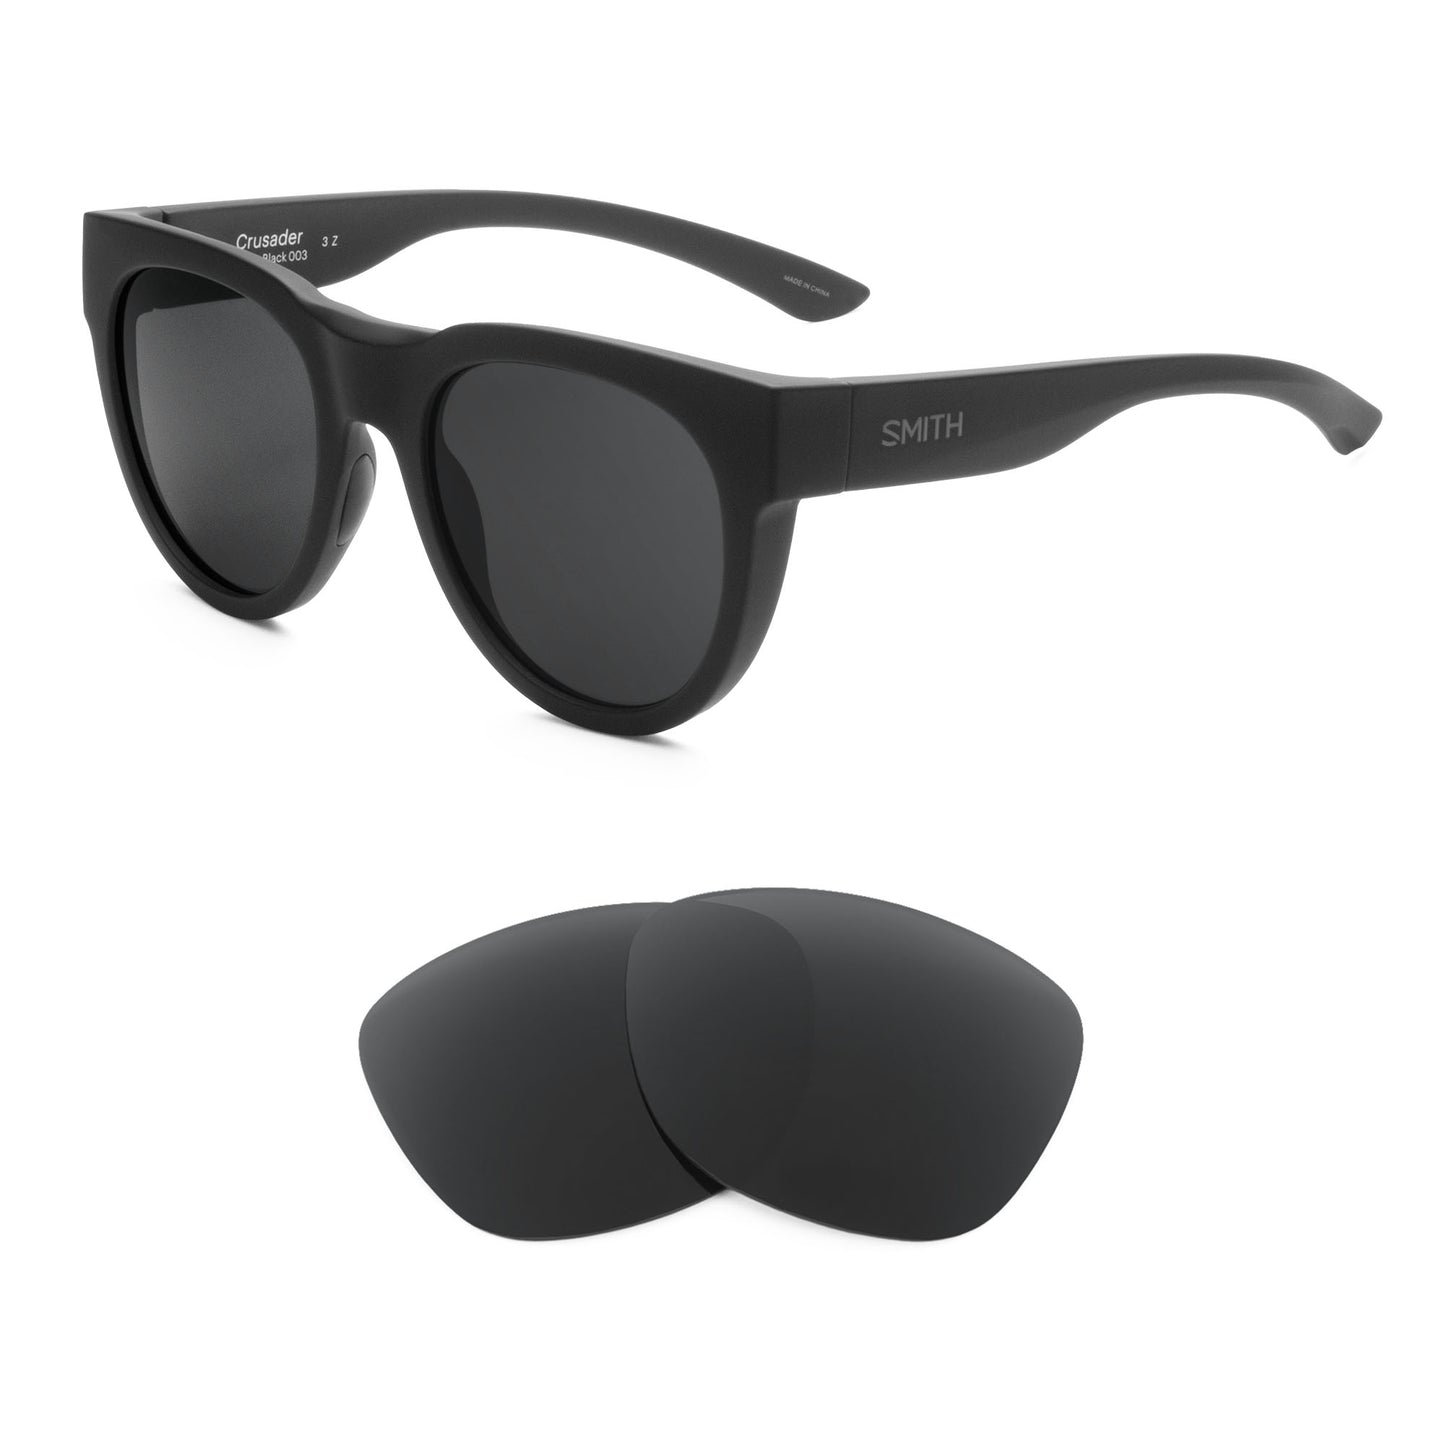 Smith Crusader sunglasses with replacement lenses